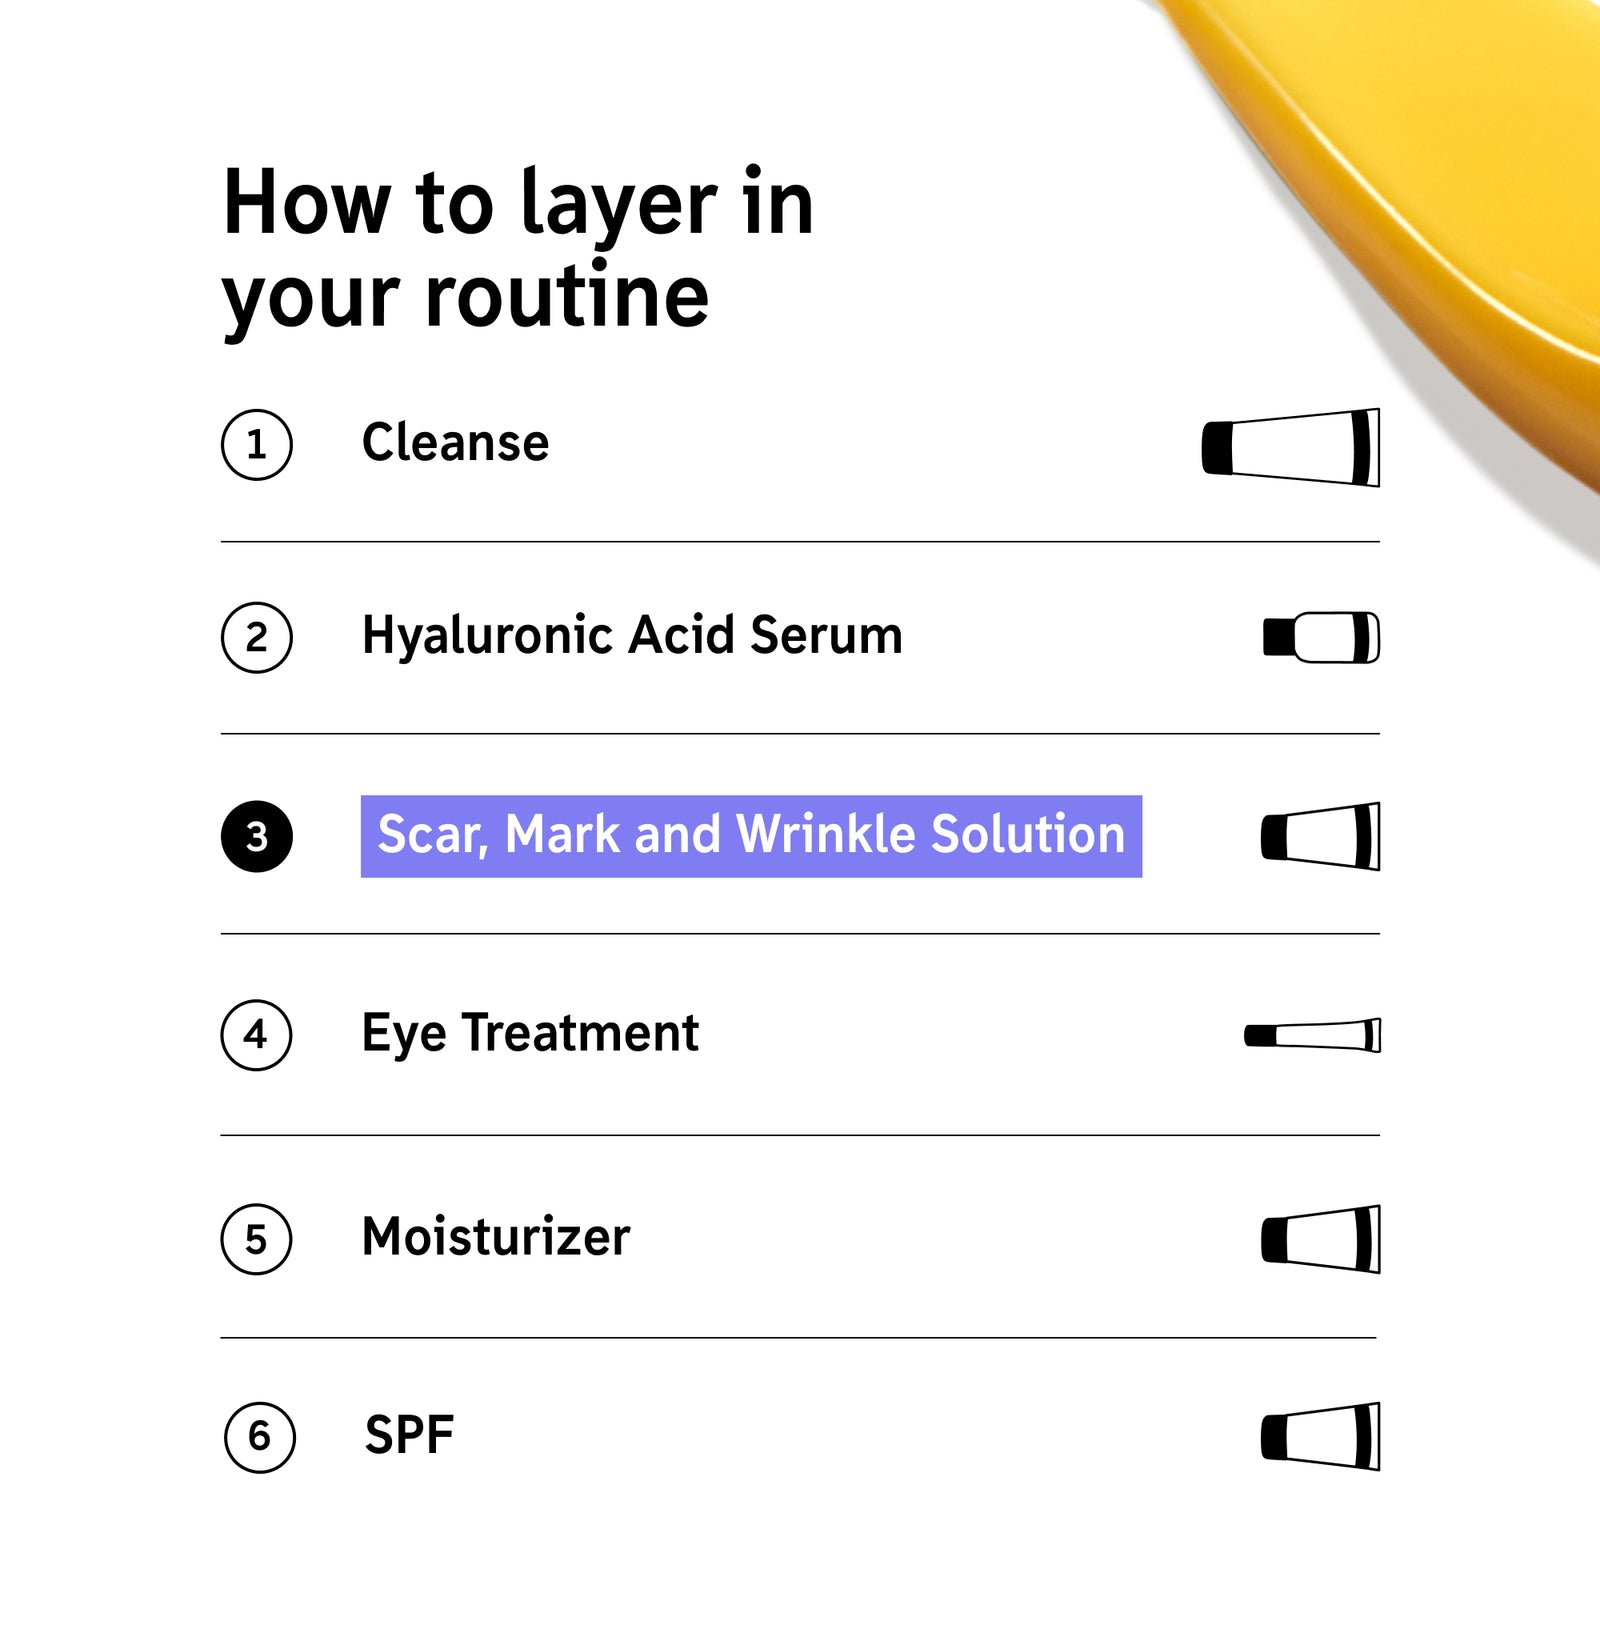 How to layer Scar mark & wrinkles solution in your routine